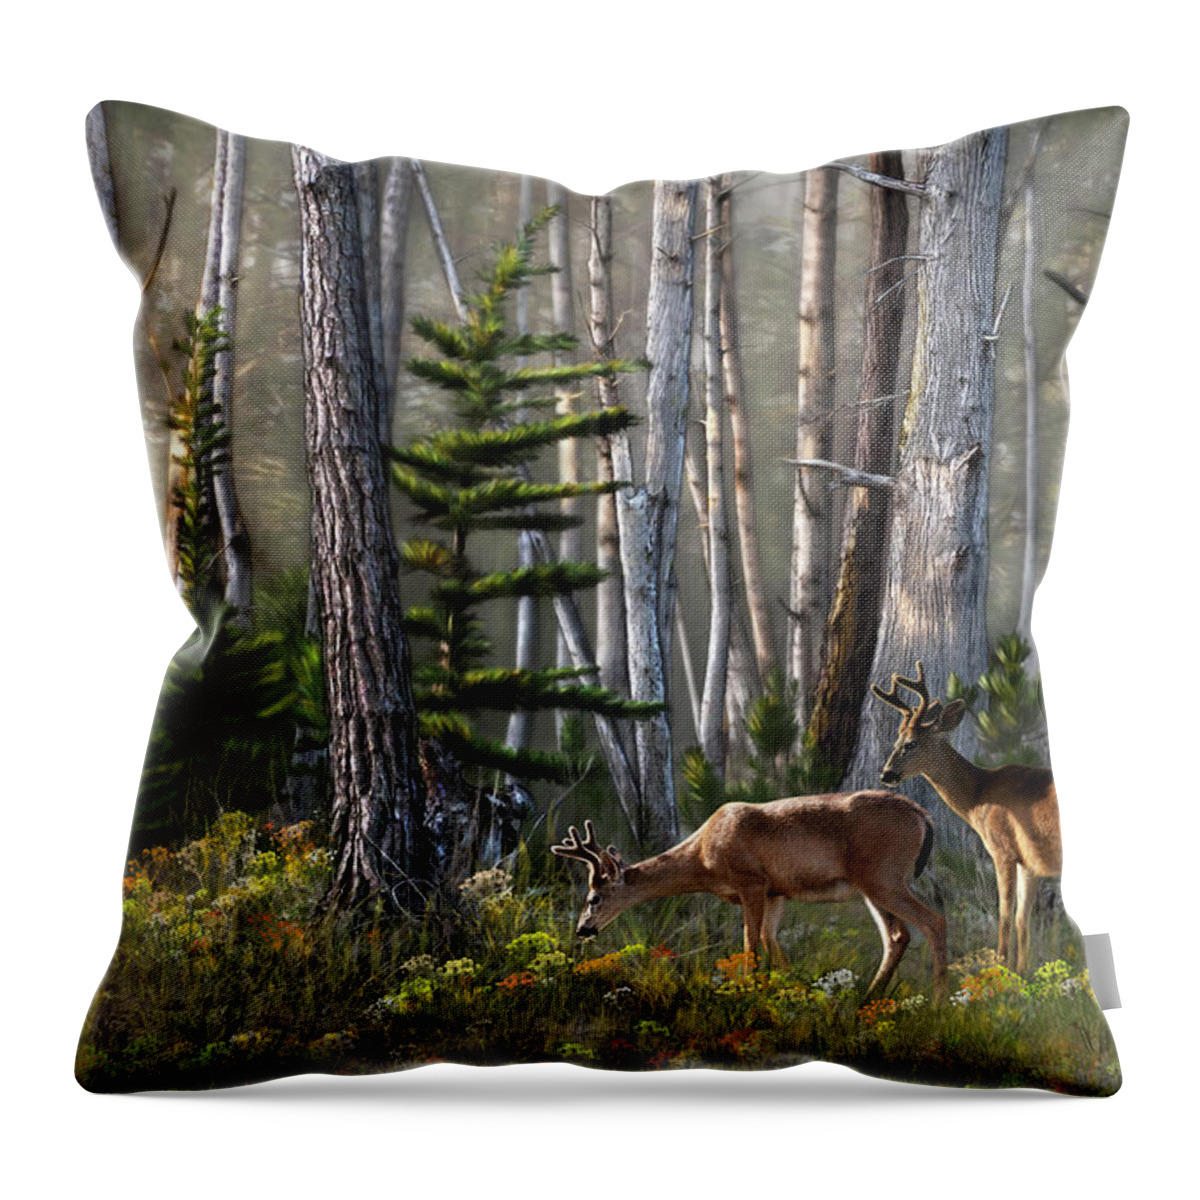 Serenity Throw Pillow featuring the digital art Serenity by Thanh Thuy Nguyen